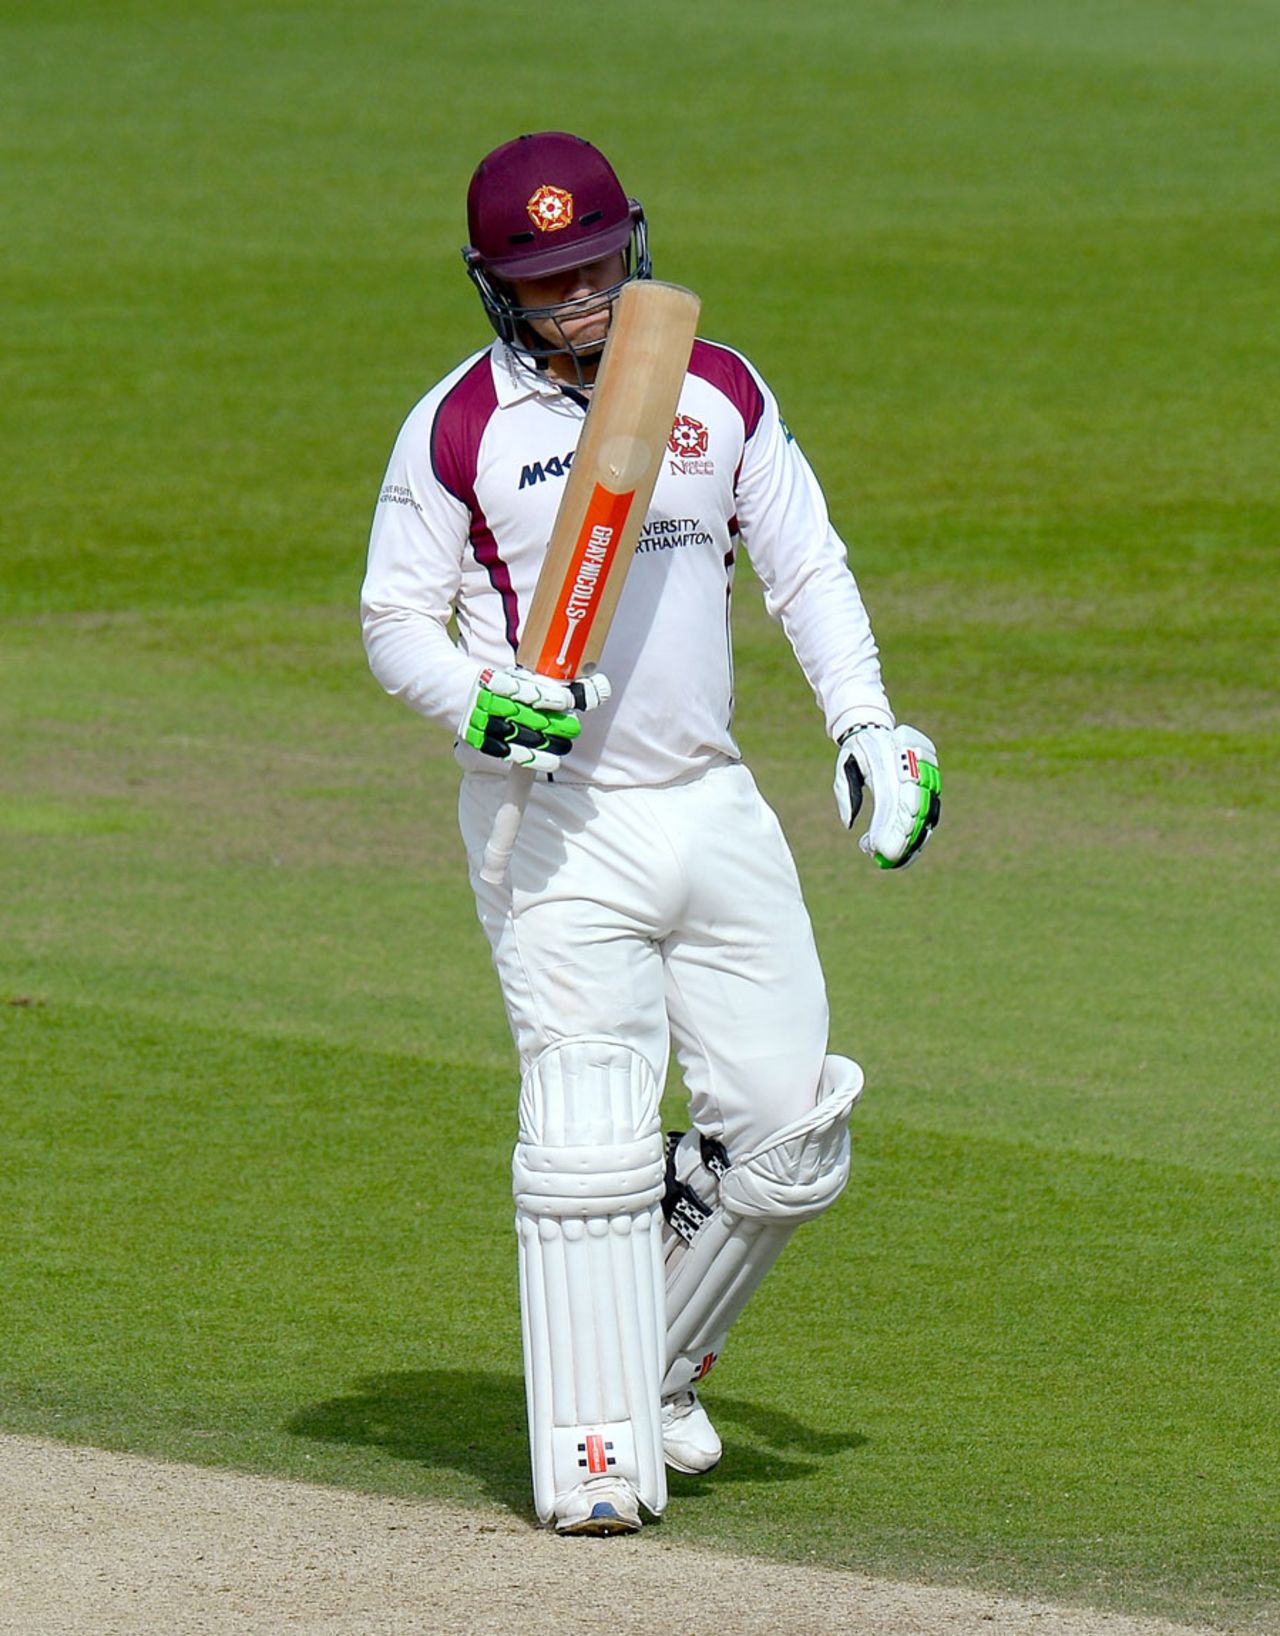 Adam Rossington struck a rapid fifty, Surrey v Northamptonshire, County Championship, Division Two, 4th day, September 25, 2015